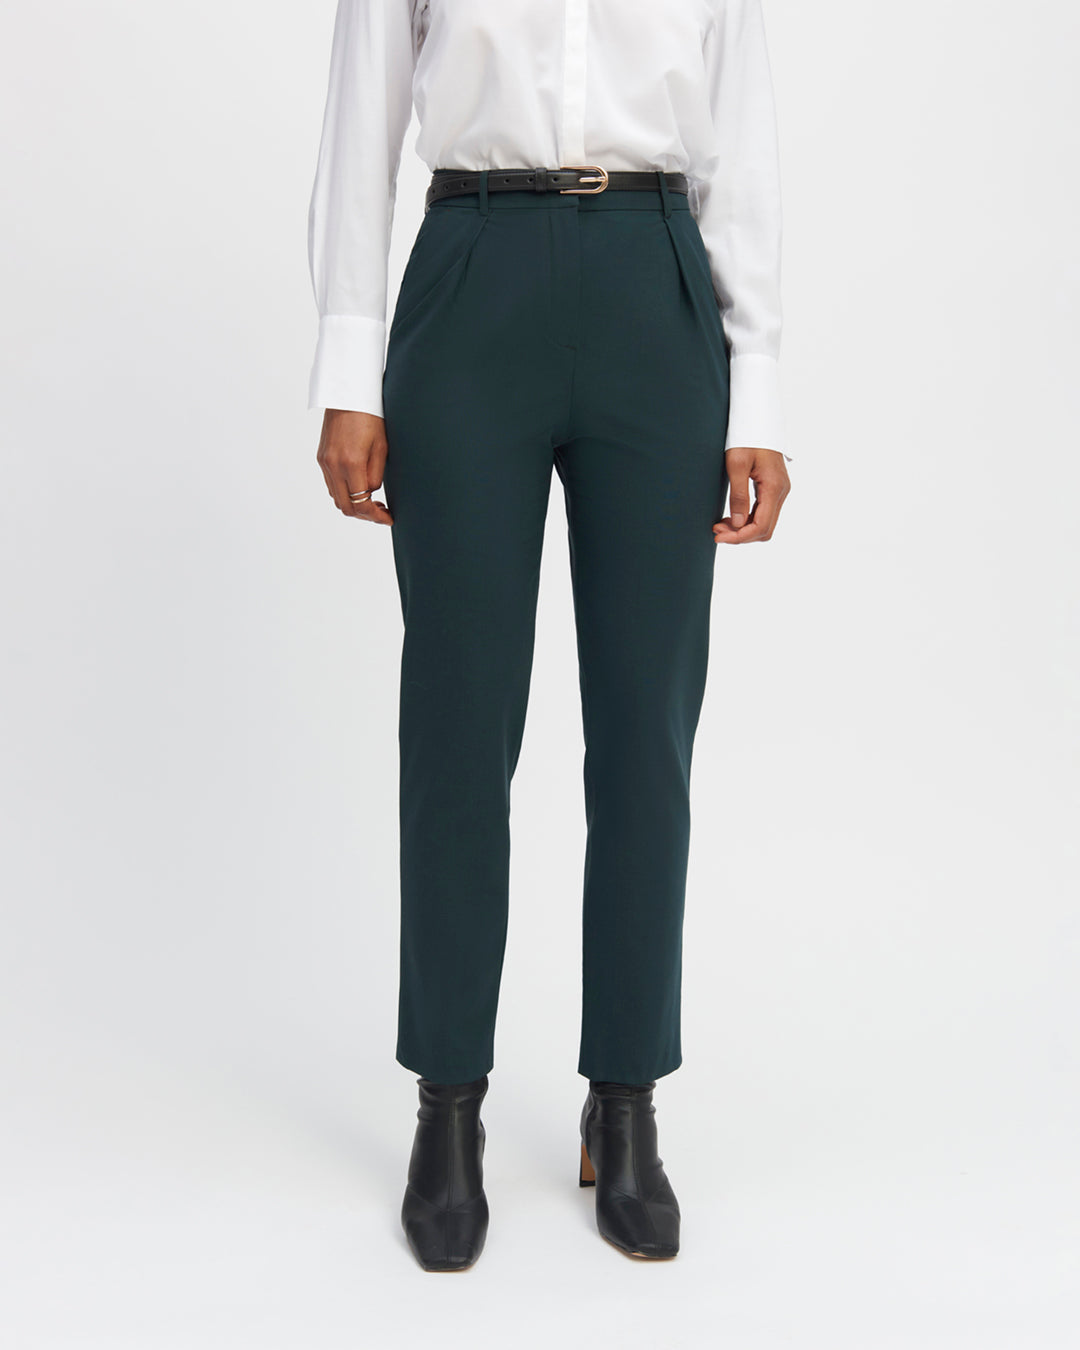 Tailor-trousers-green-cut-7-8th-waist-high-pleated-under-the-two-pockets-a-l-italian-belt-assorted-tone-on-tone-17H10-tailors-for-women-paris-